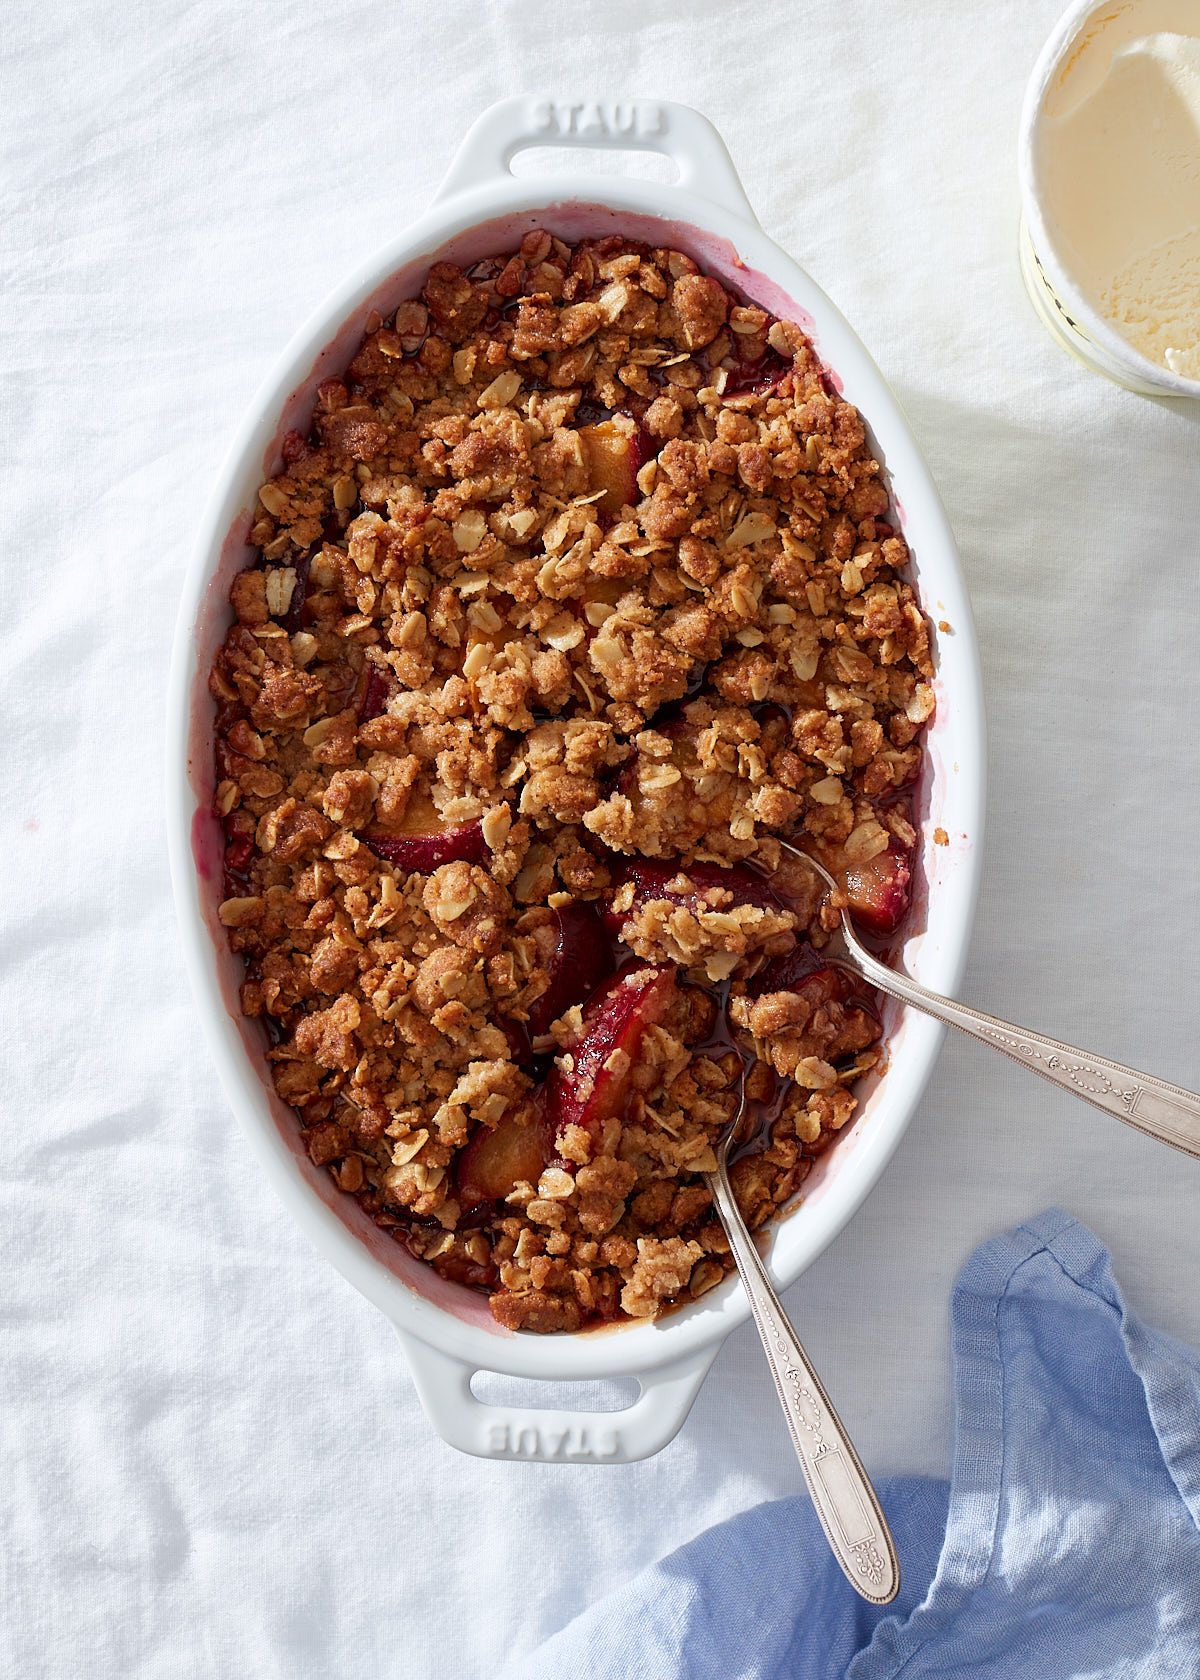 A plum crumble in a white baking dish with two vintage silver spoons.